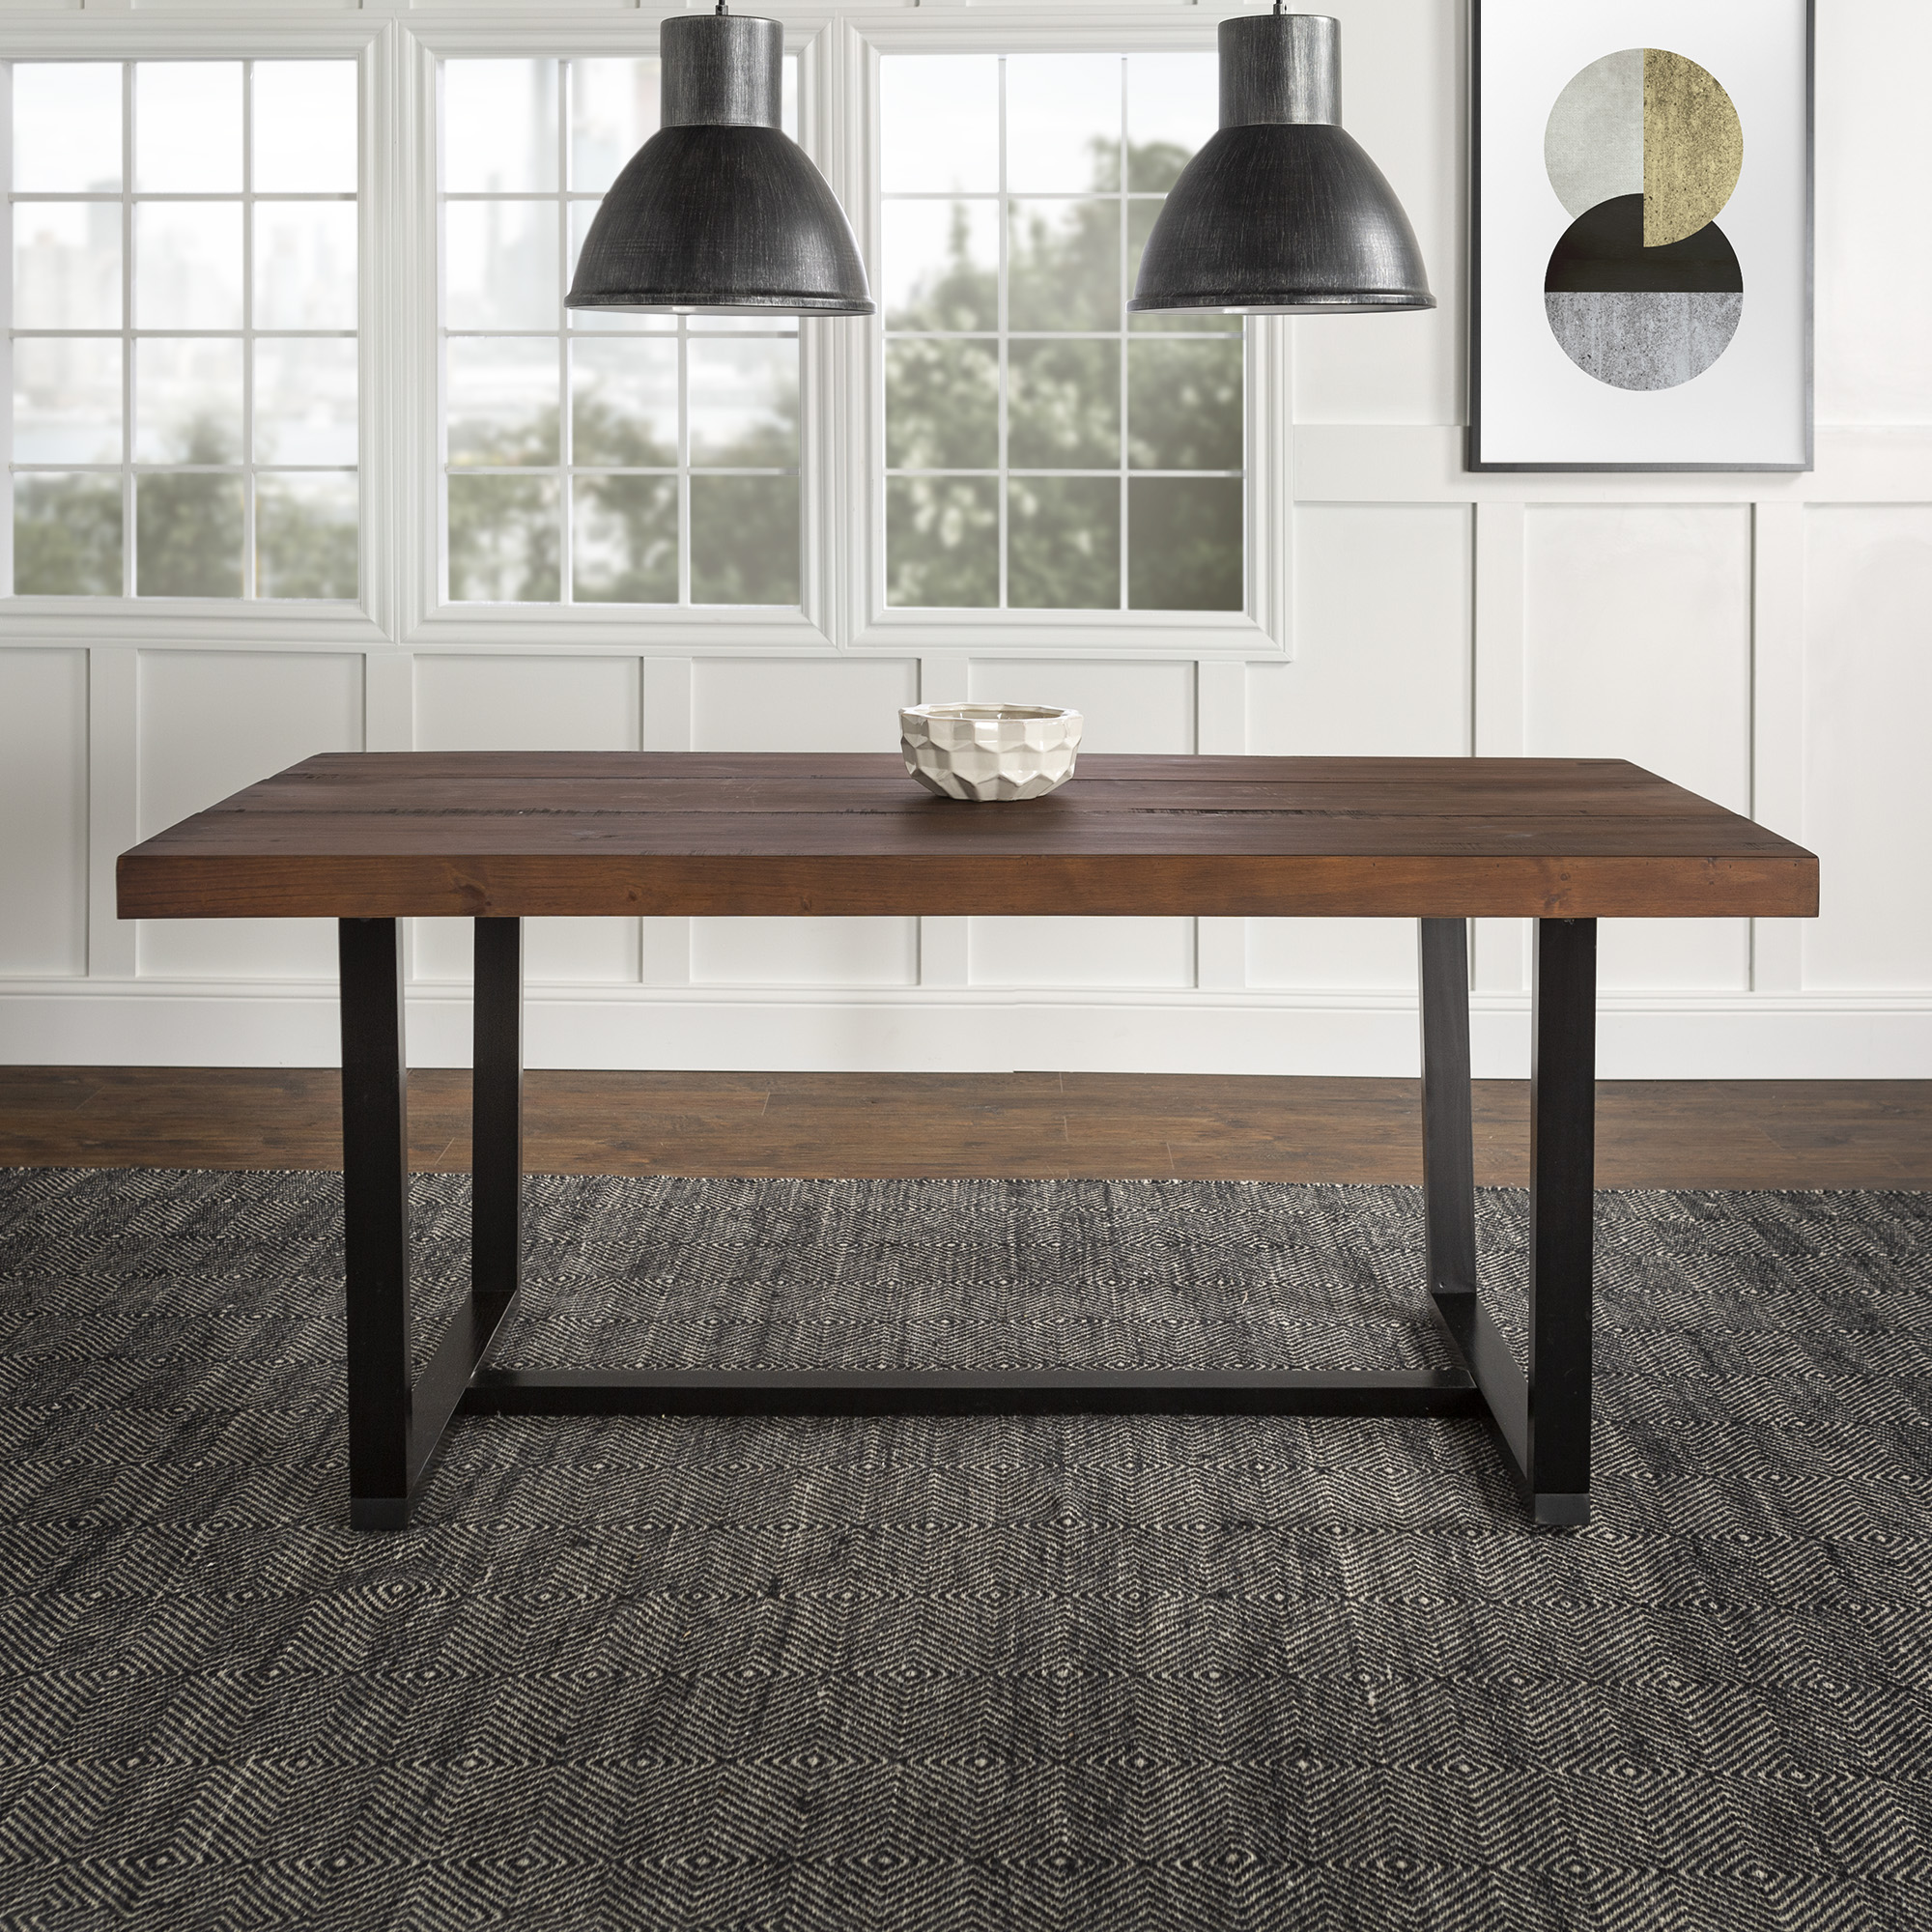 Buy Woven Paths Rustic Farmhouse Solid Wood Dining Table